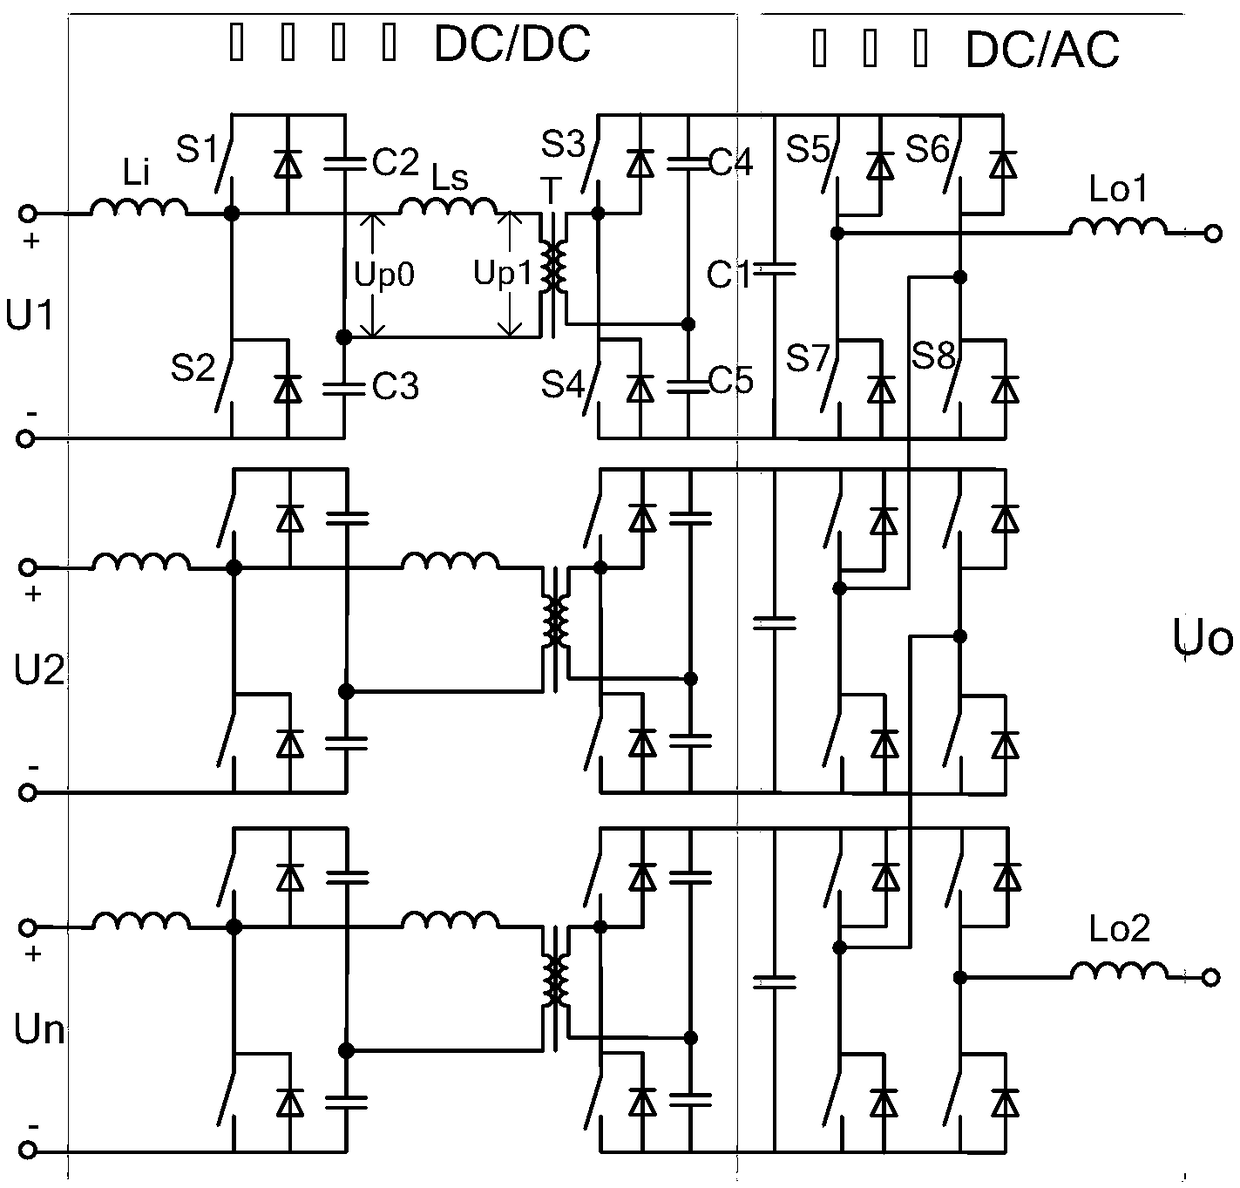 A Combined Bidirectional DC/AC Converter Topology